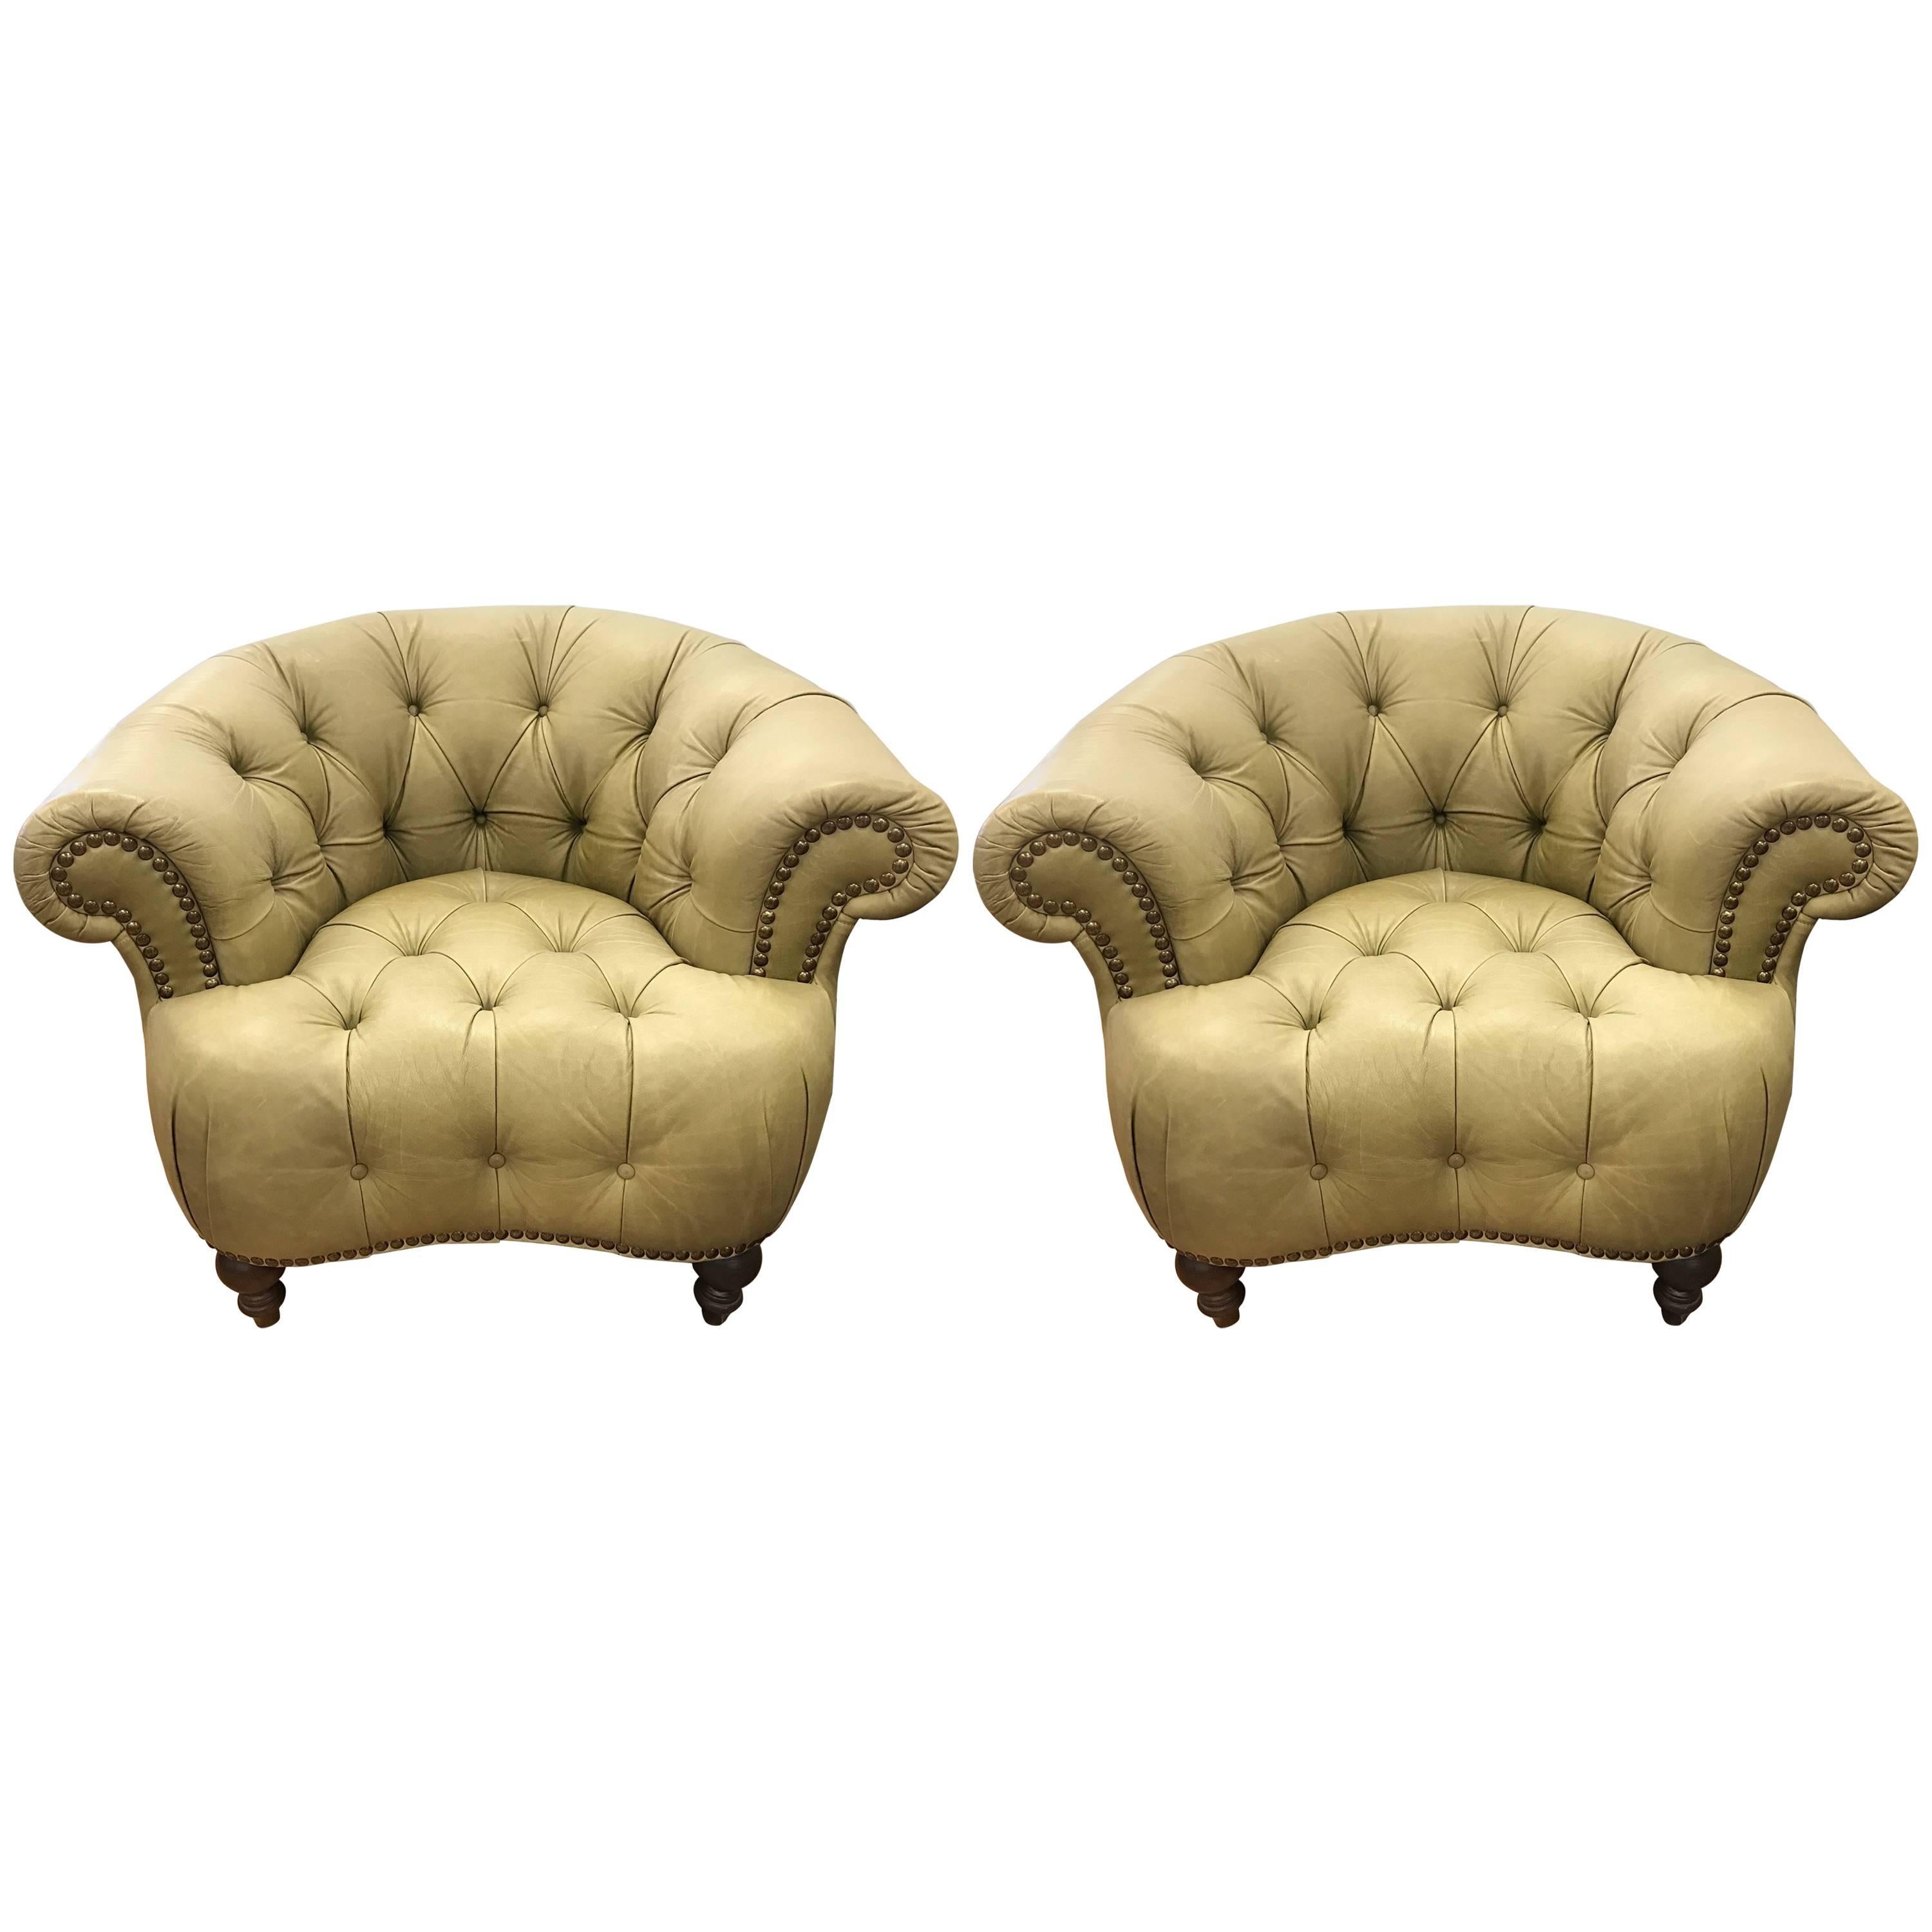 Pair of Leather Chesterfield Tufted Chairs, Made in Italy